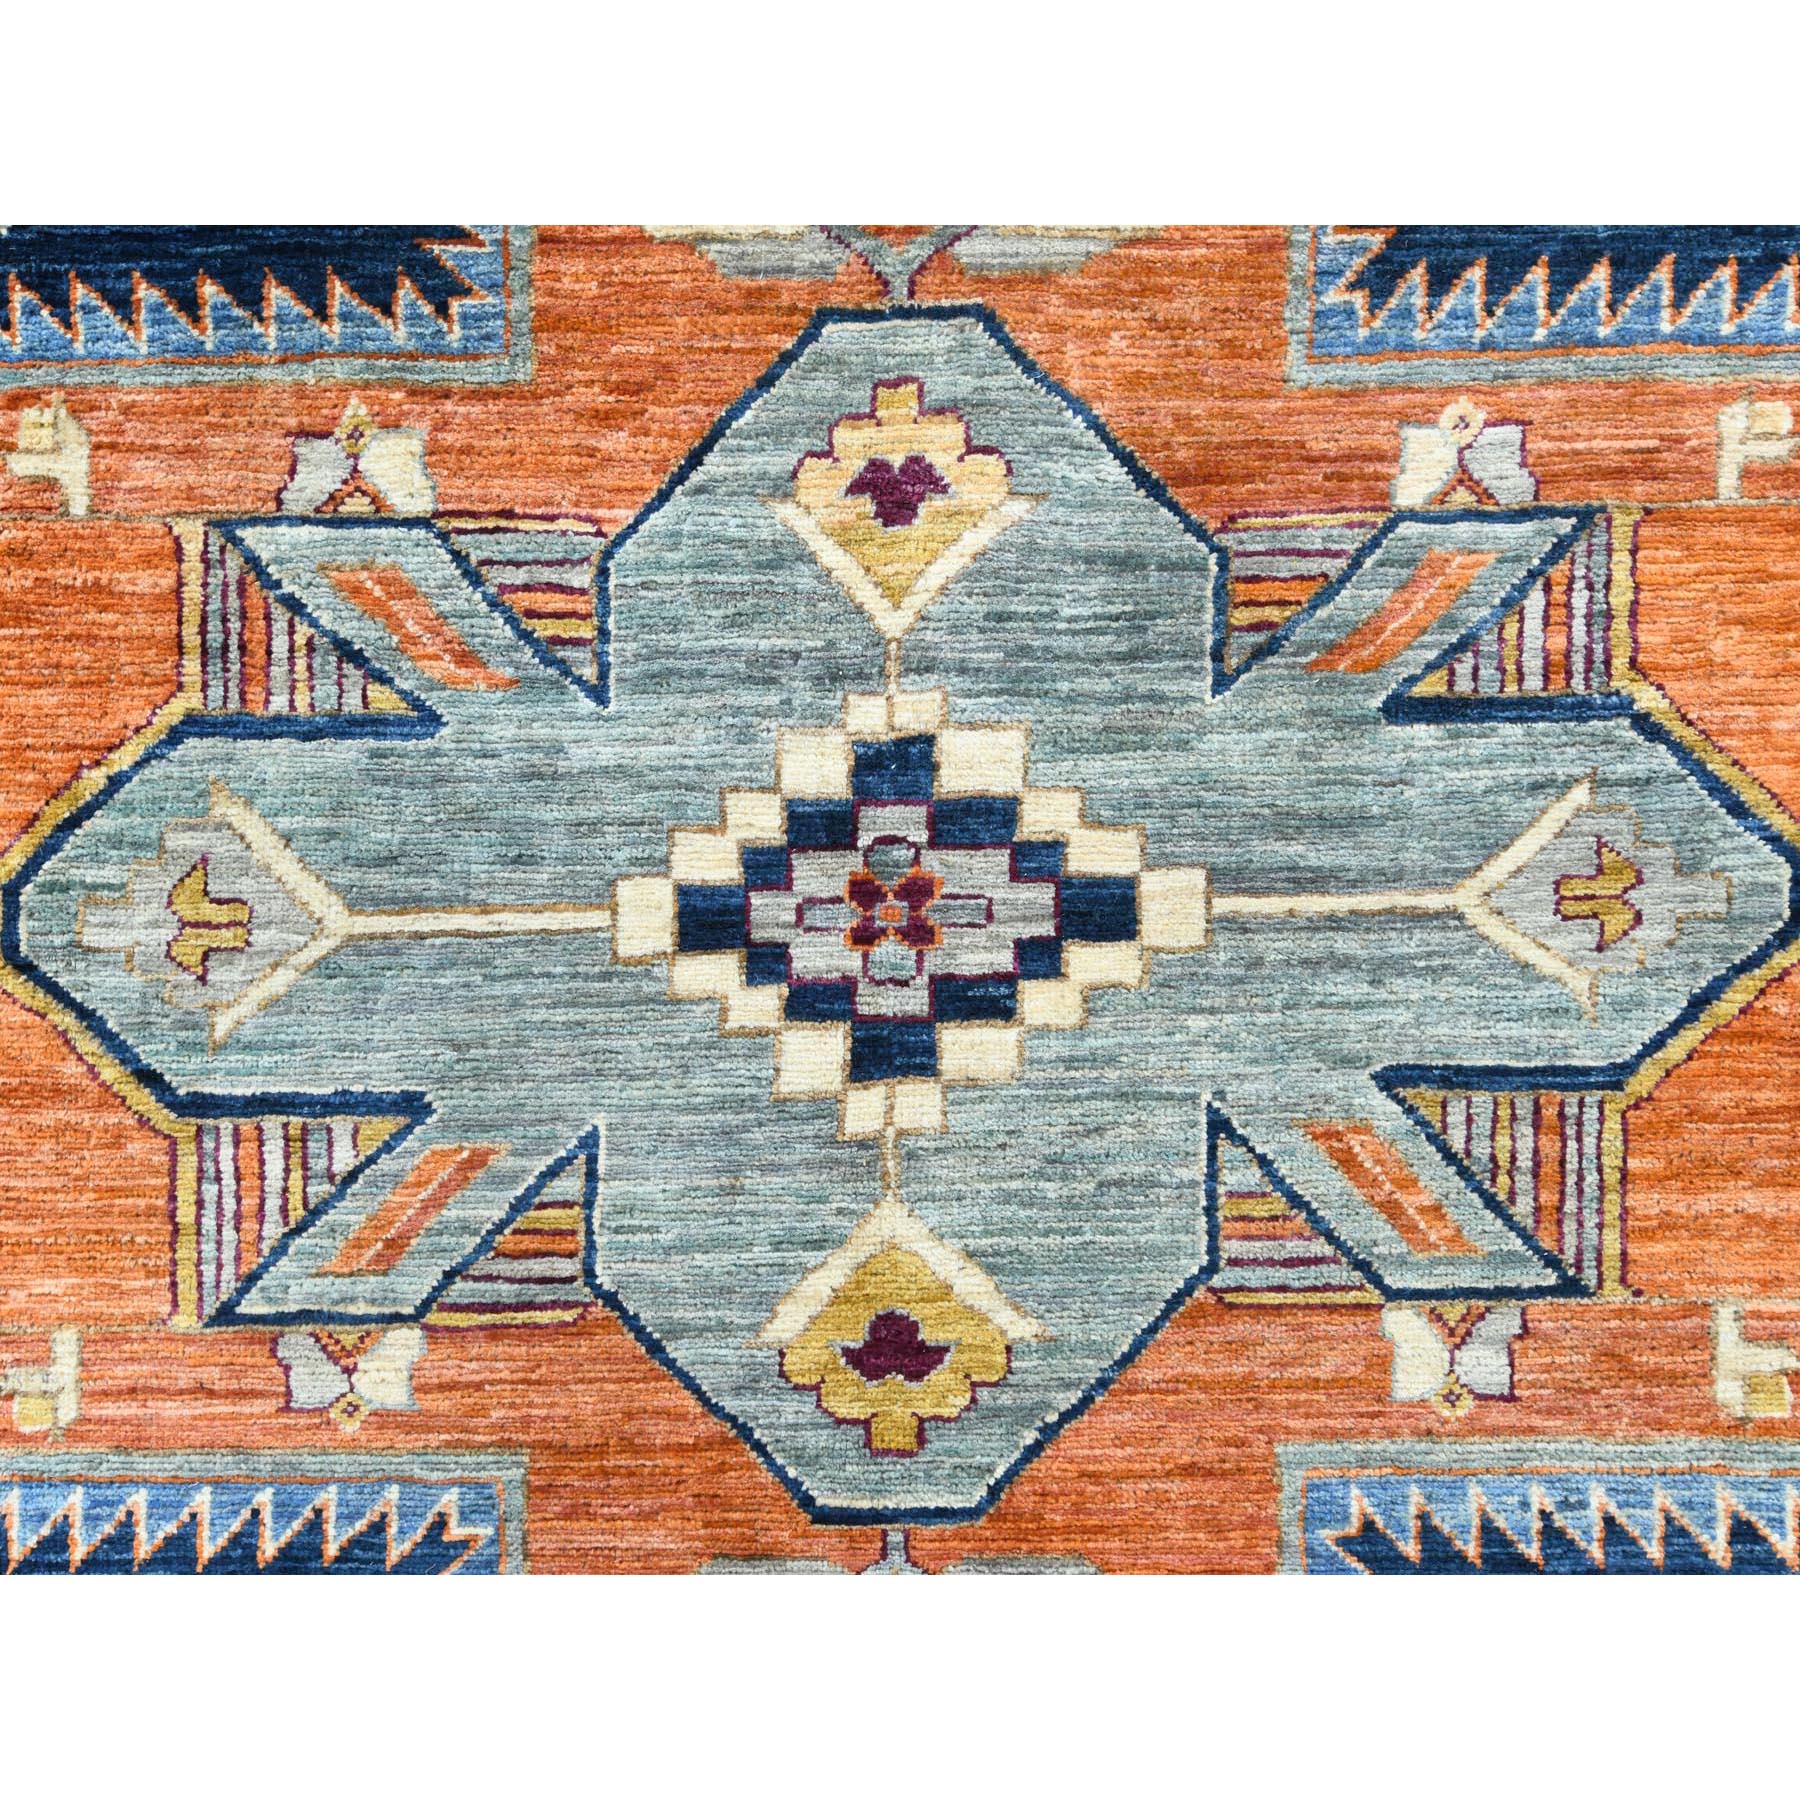 9'1"x11'7" Navy Blue, Armenian Inspired Caucasian Design with Birds Figurines 200 KPSI, Vegetable Dyes Dense Weave, Pure Wool Hand Woven, Oriental Rug 